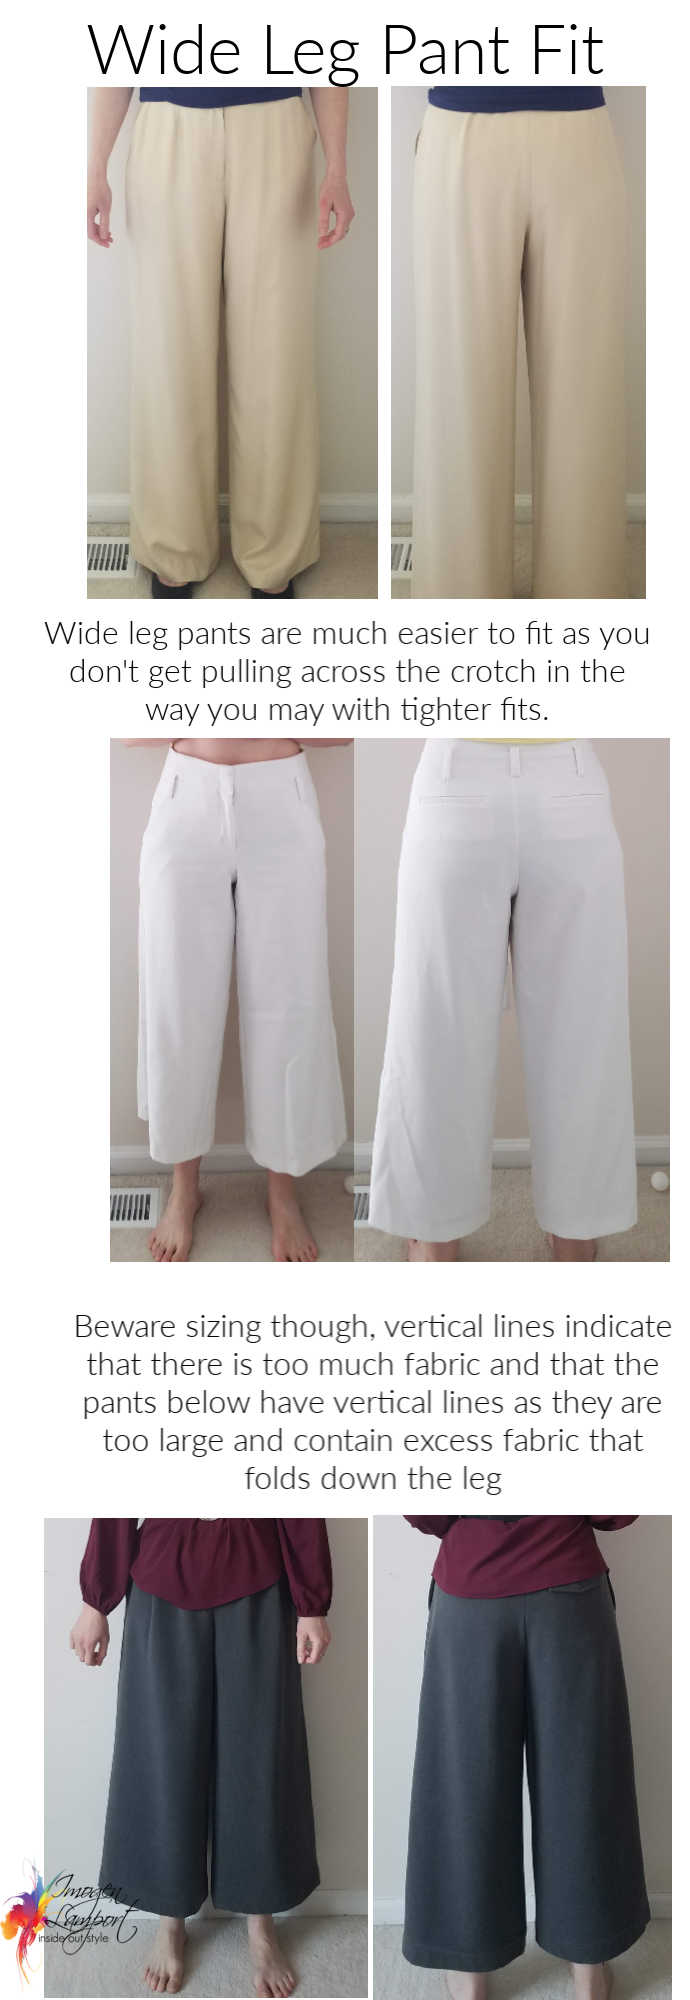 wide leg pant fit issues